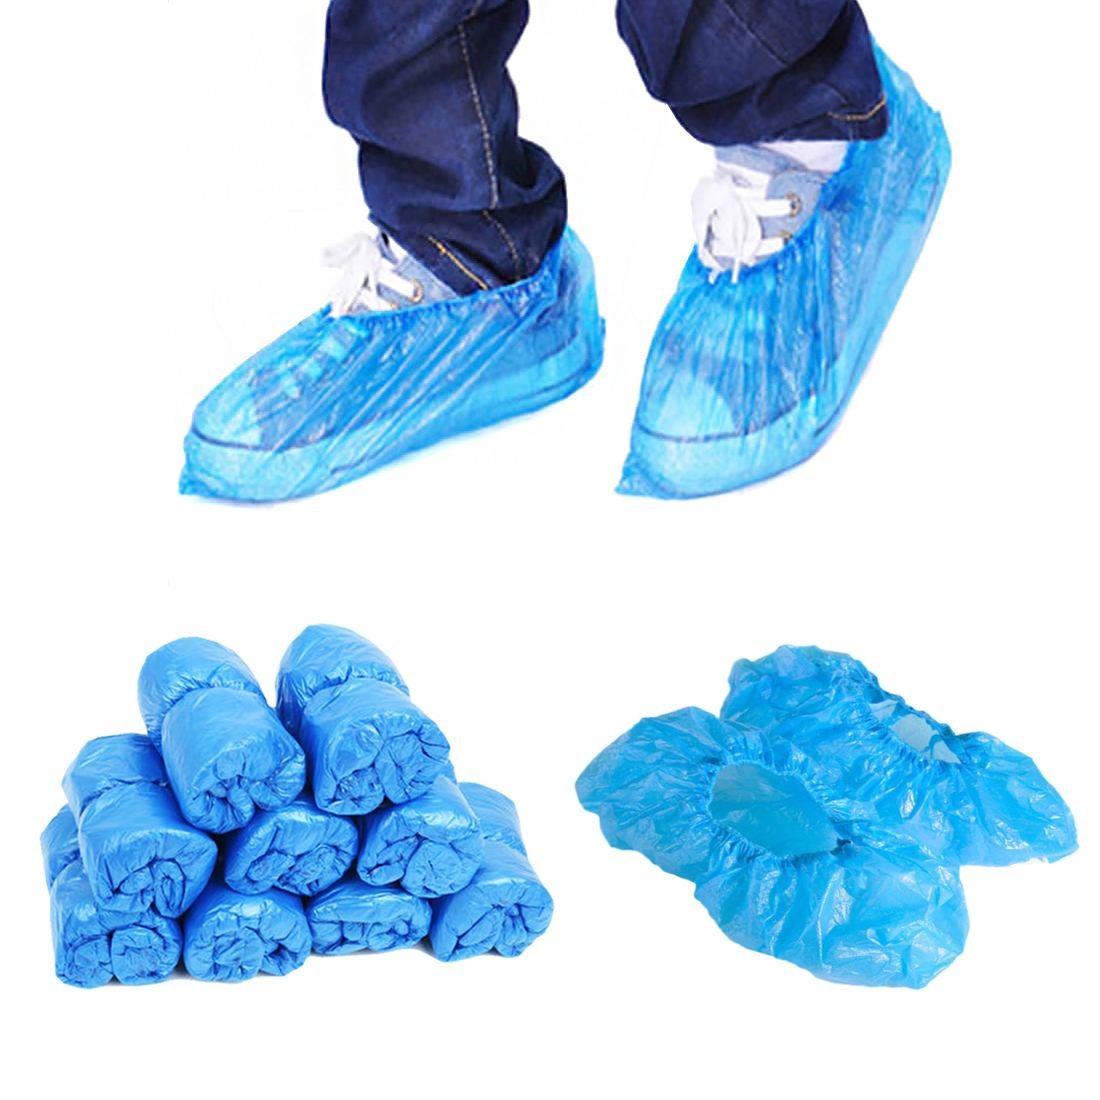 100-2000pcs Disposable Shoe Covers Anti-slip Non-woven Dustproof for Indoor Home 